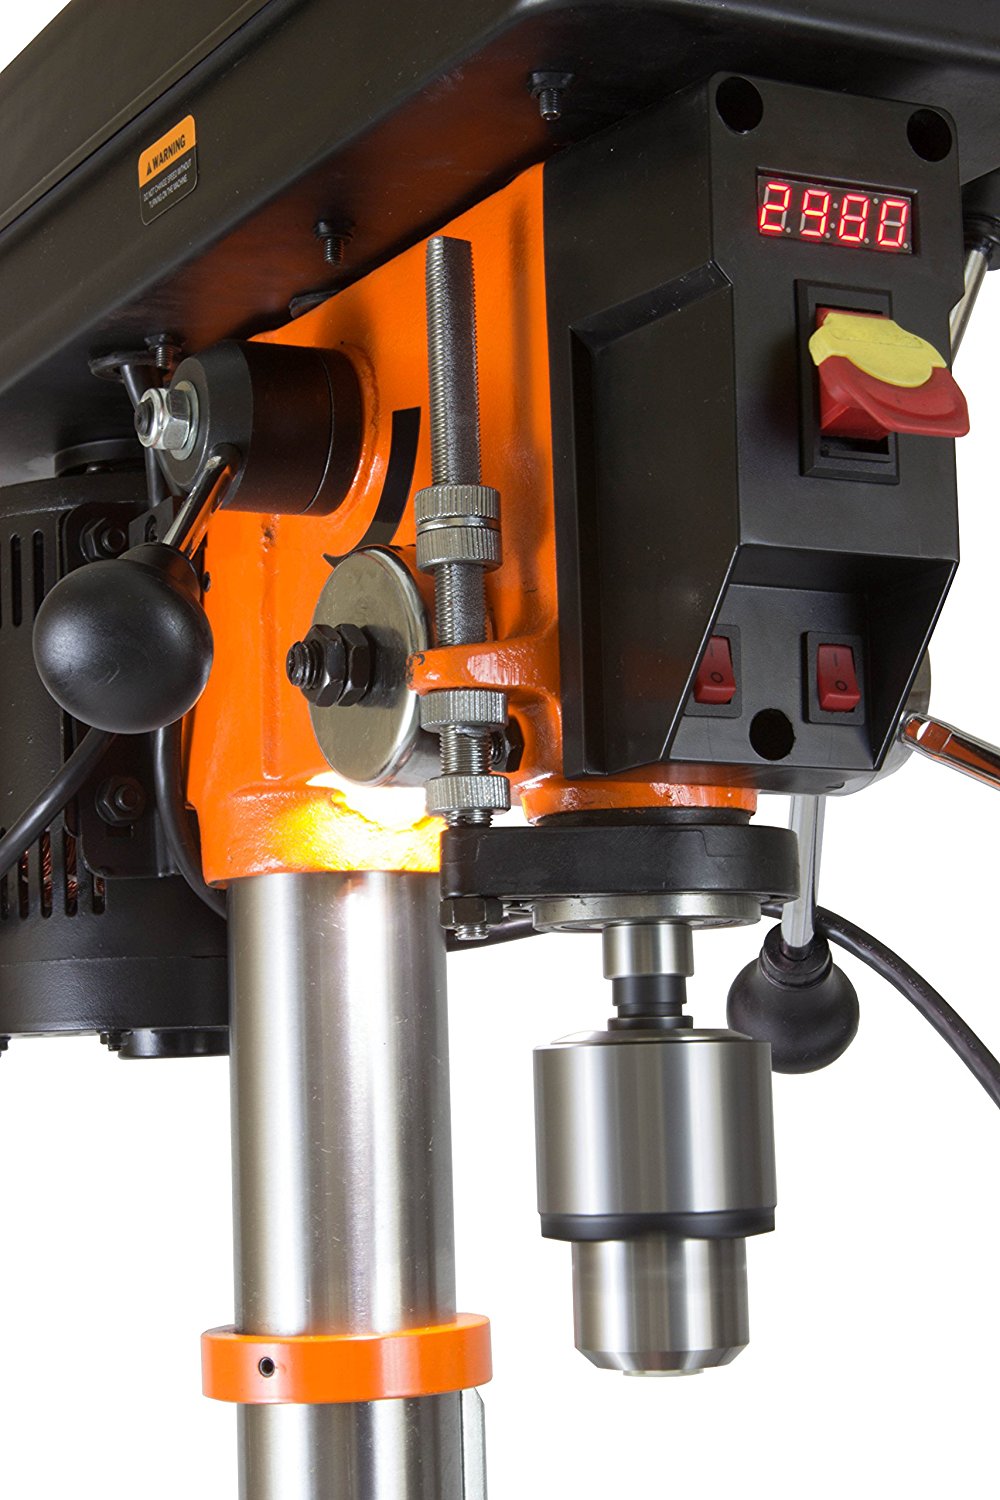 WEN drill press review